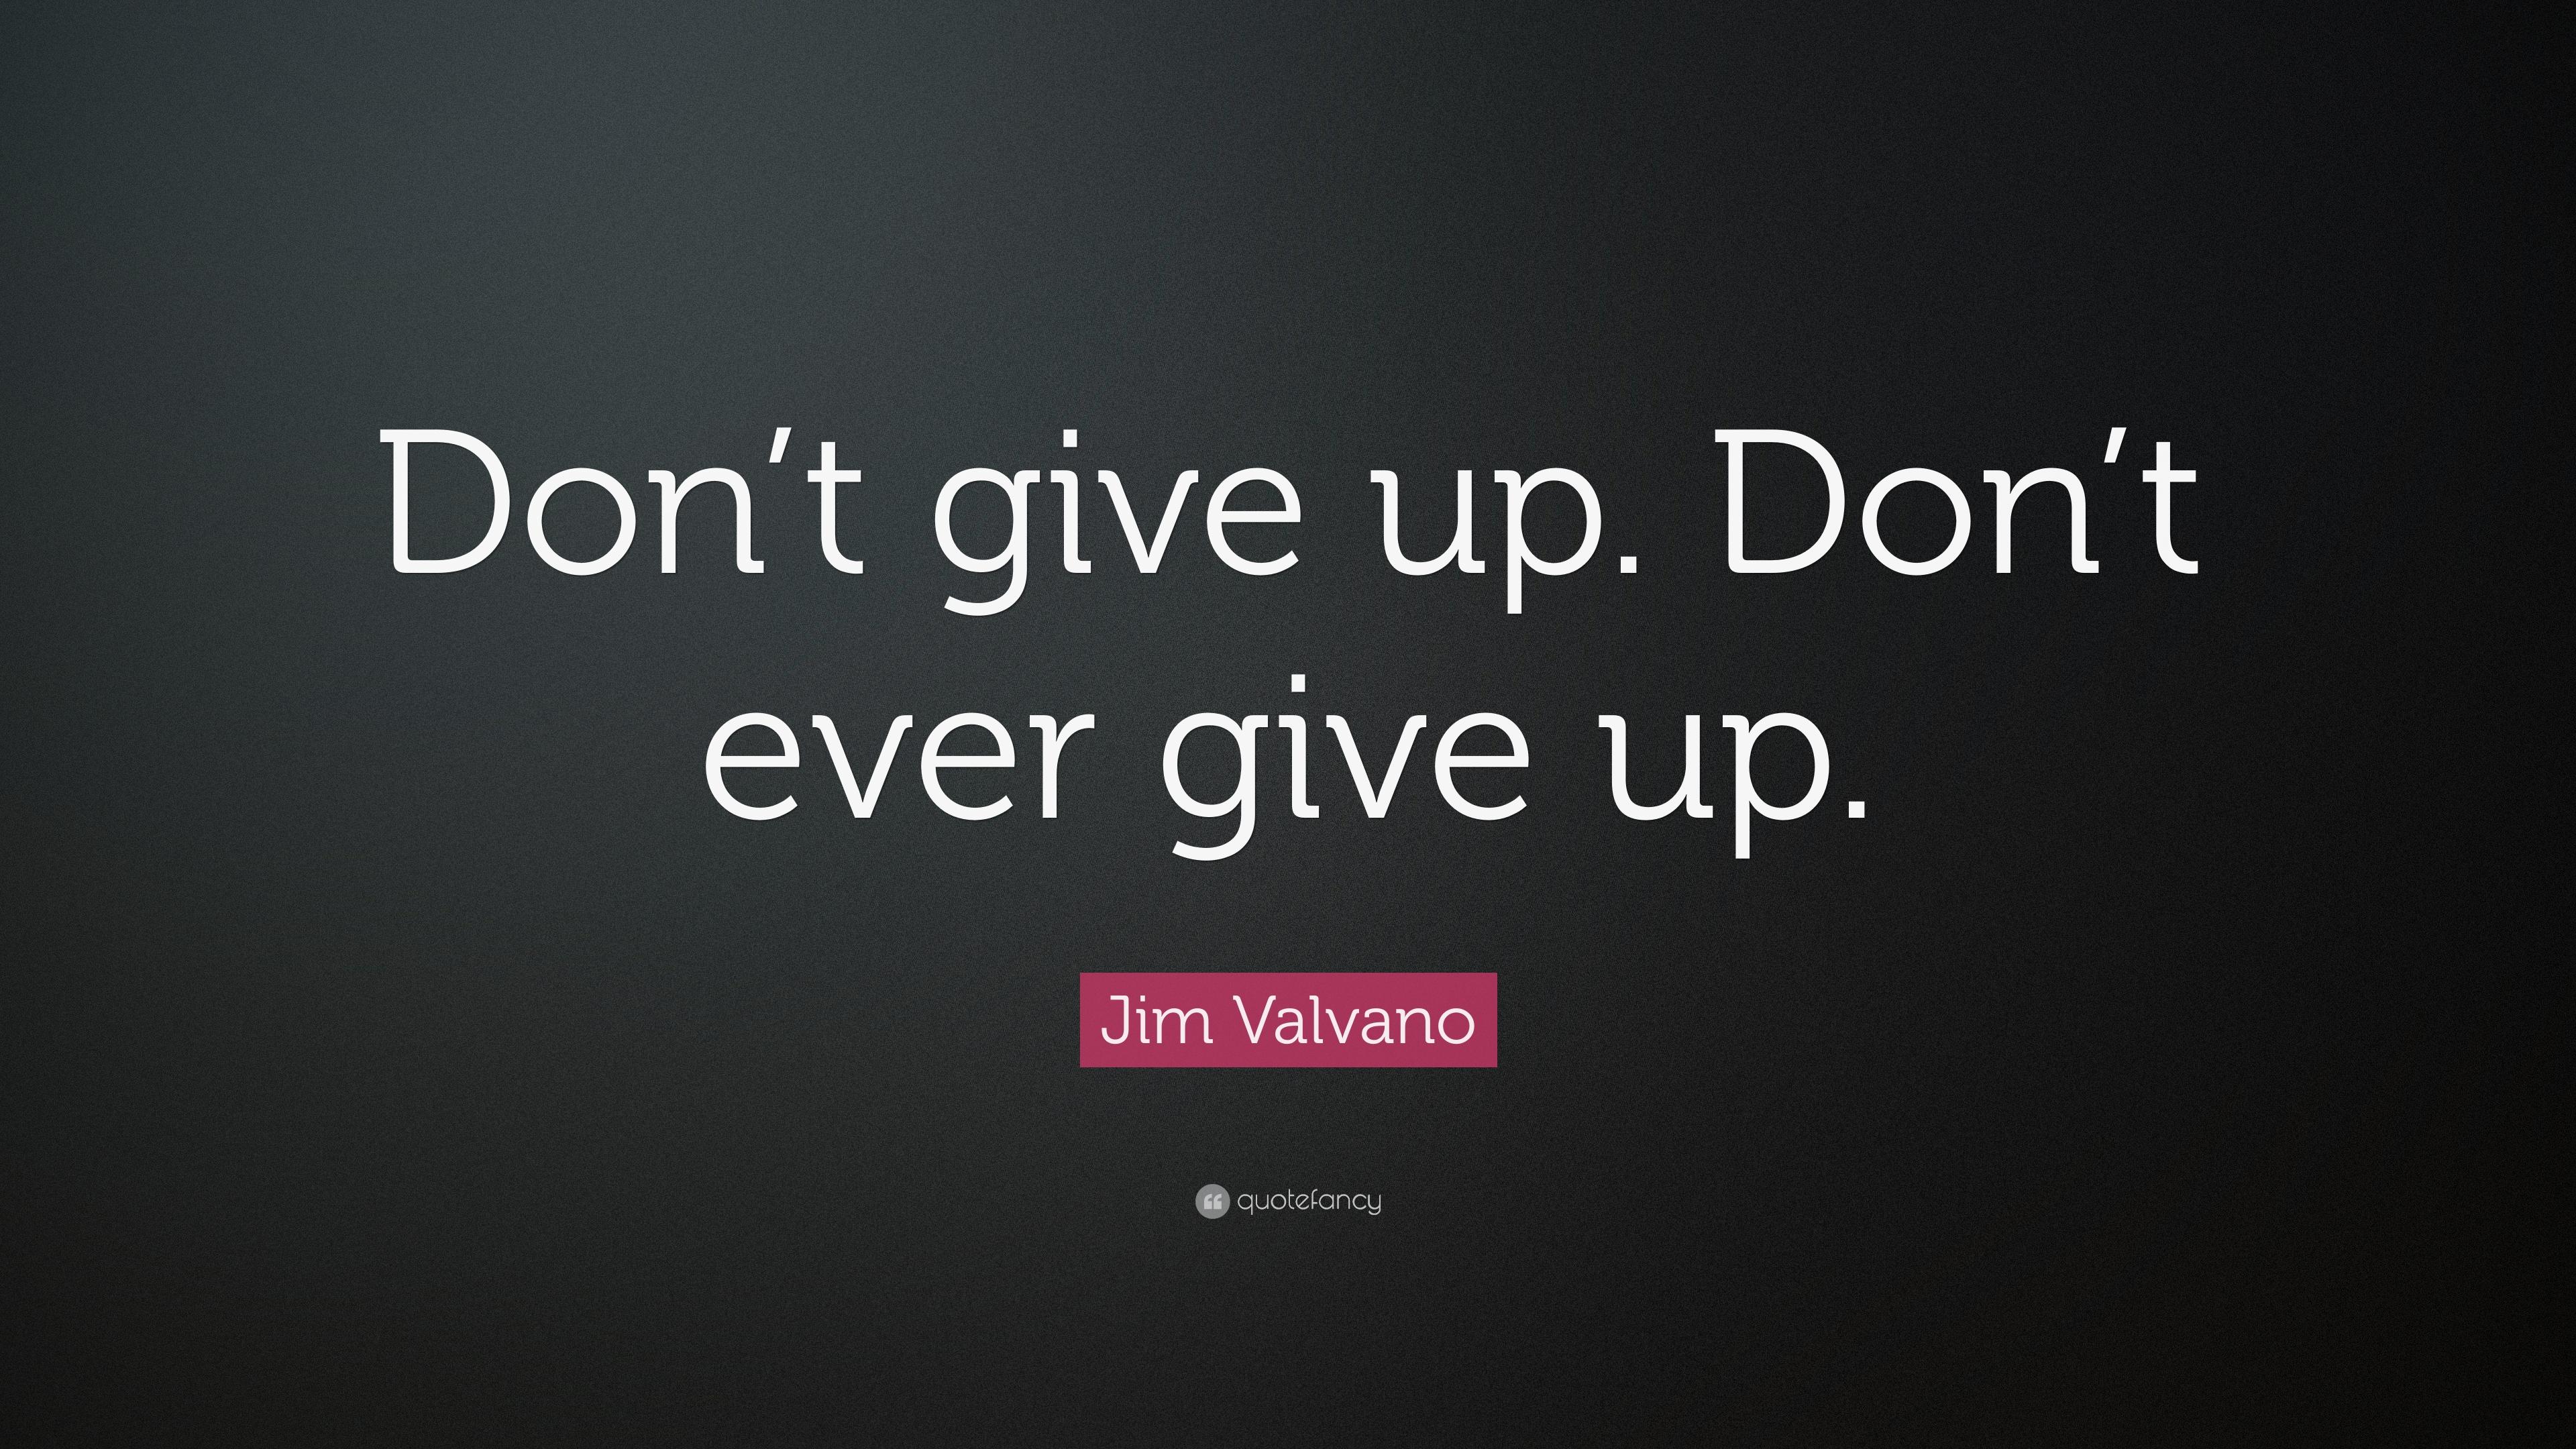 Don't Give Up Wallpapers - Wallpaper Cave